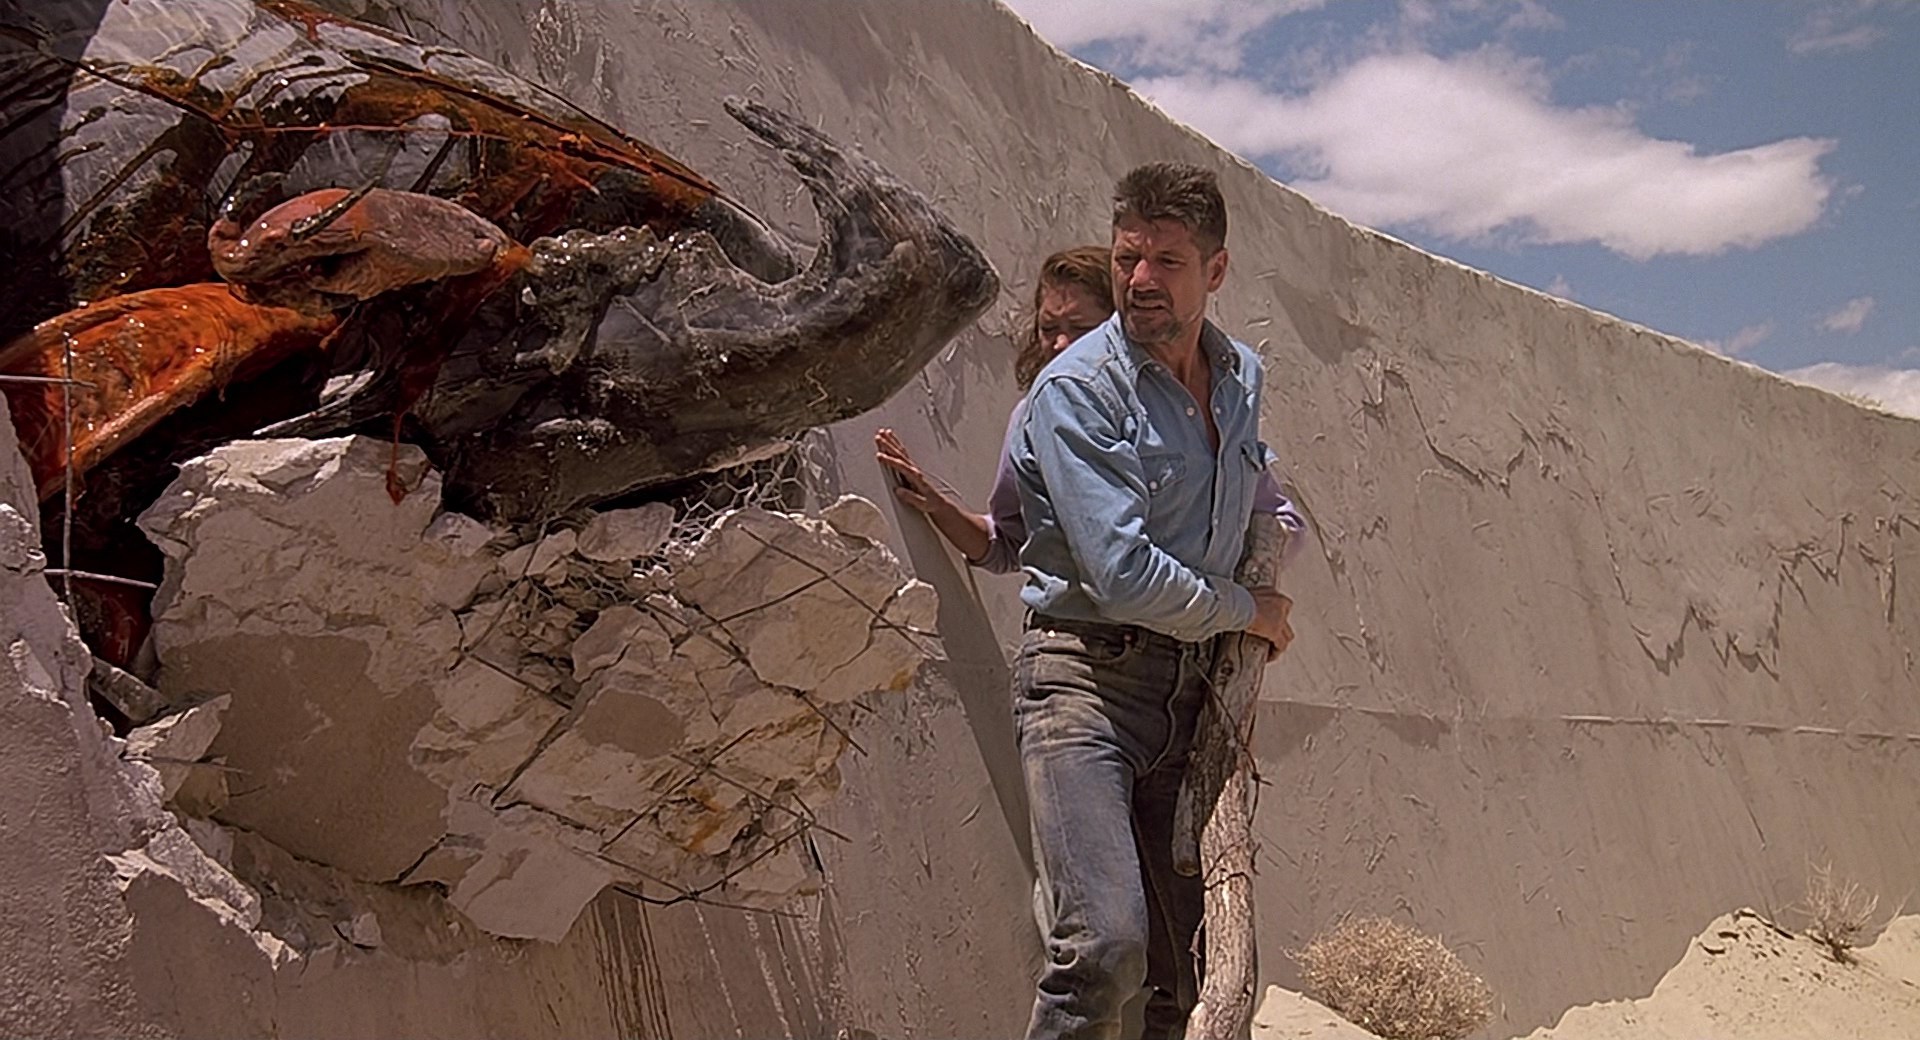 This is a still from the film, Tremors.